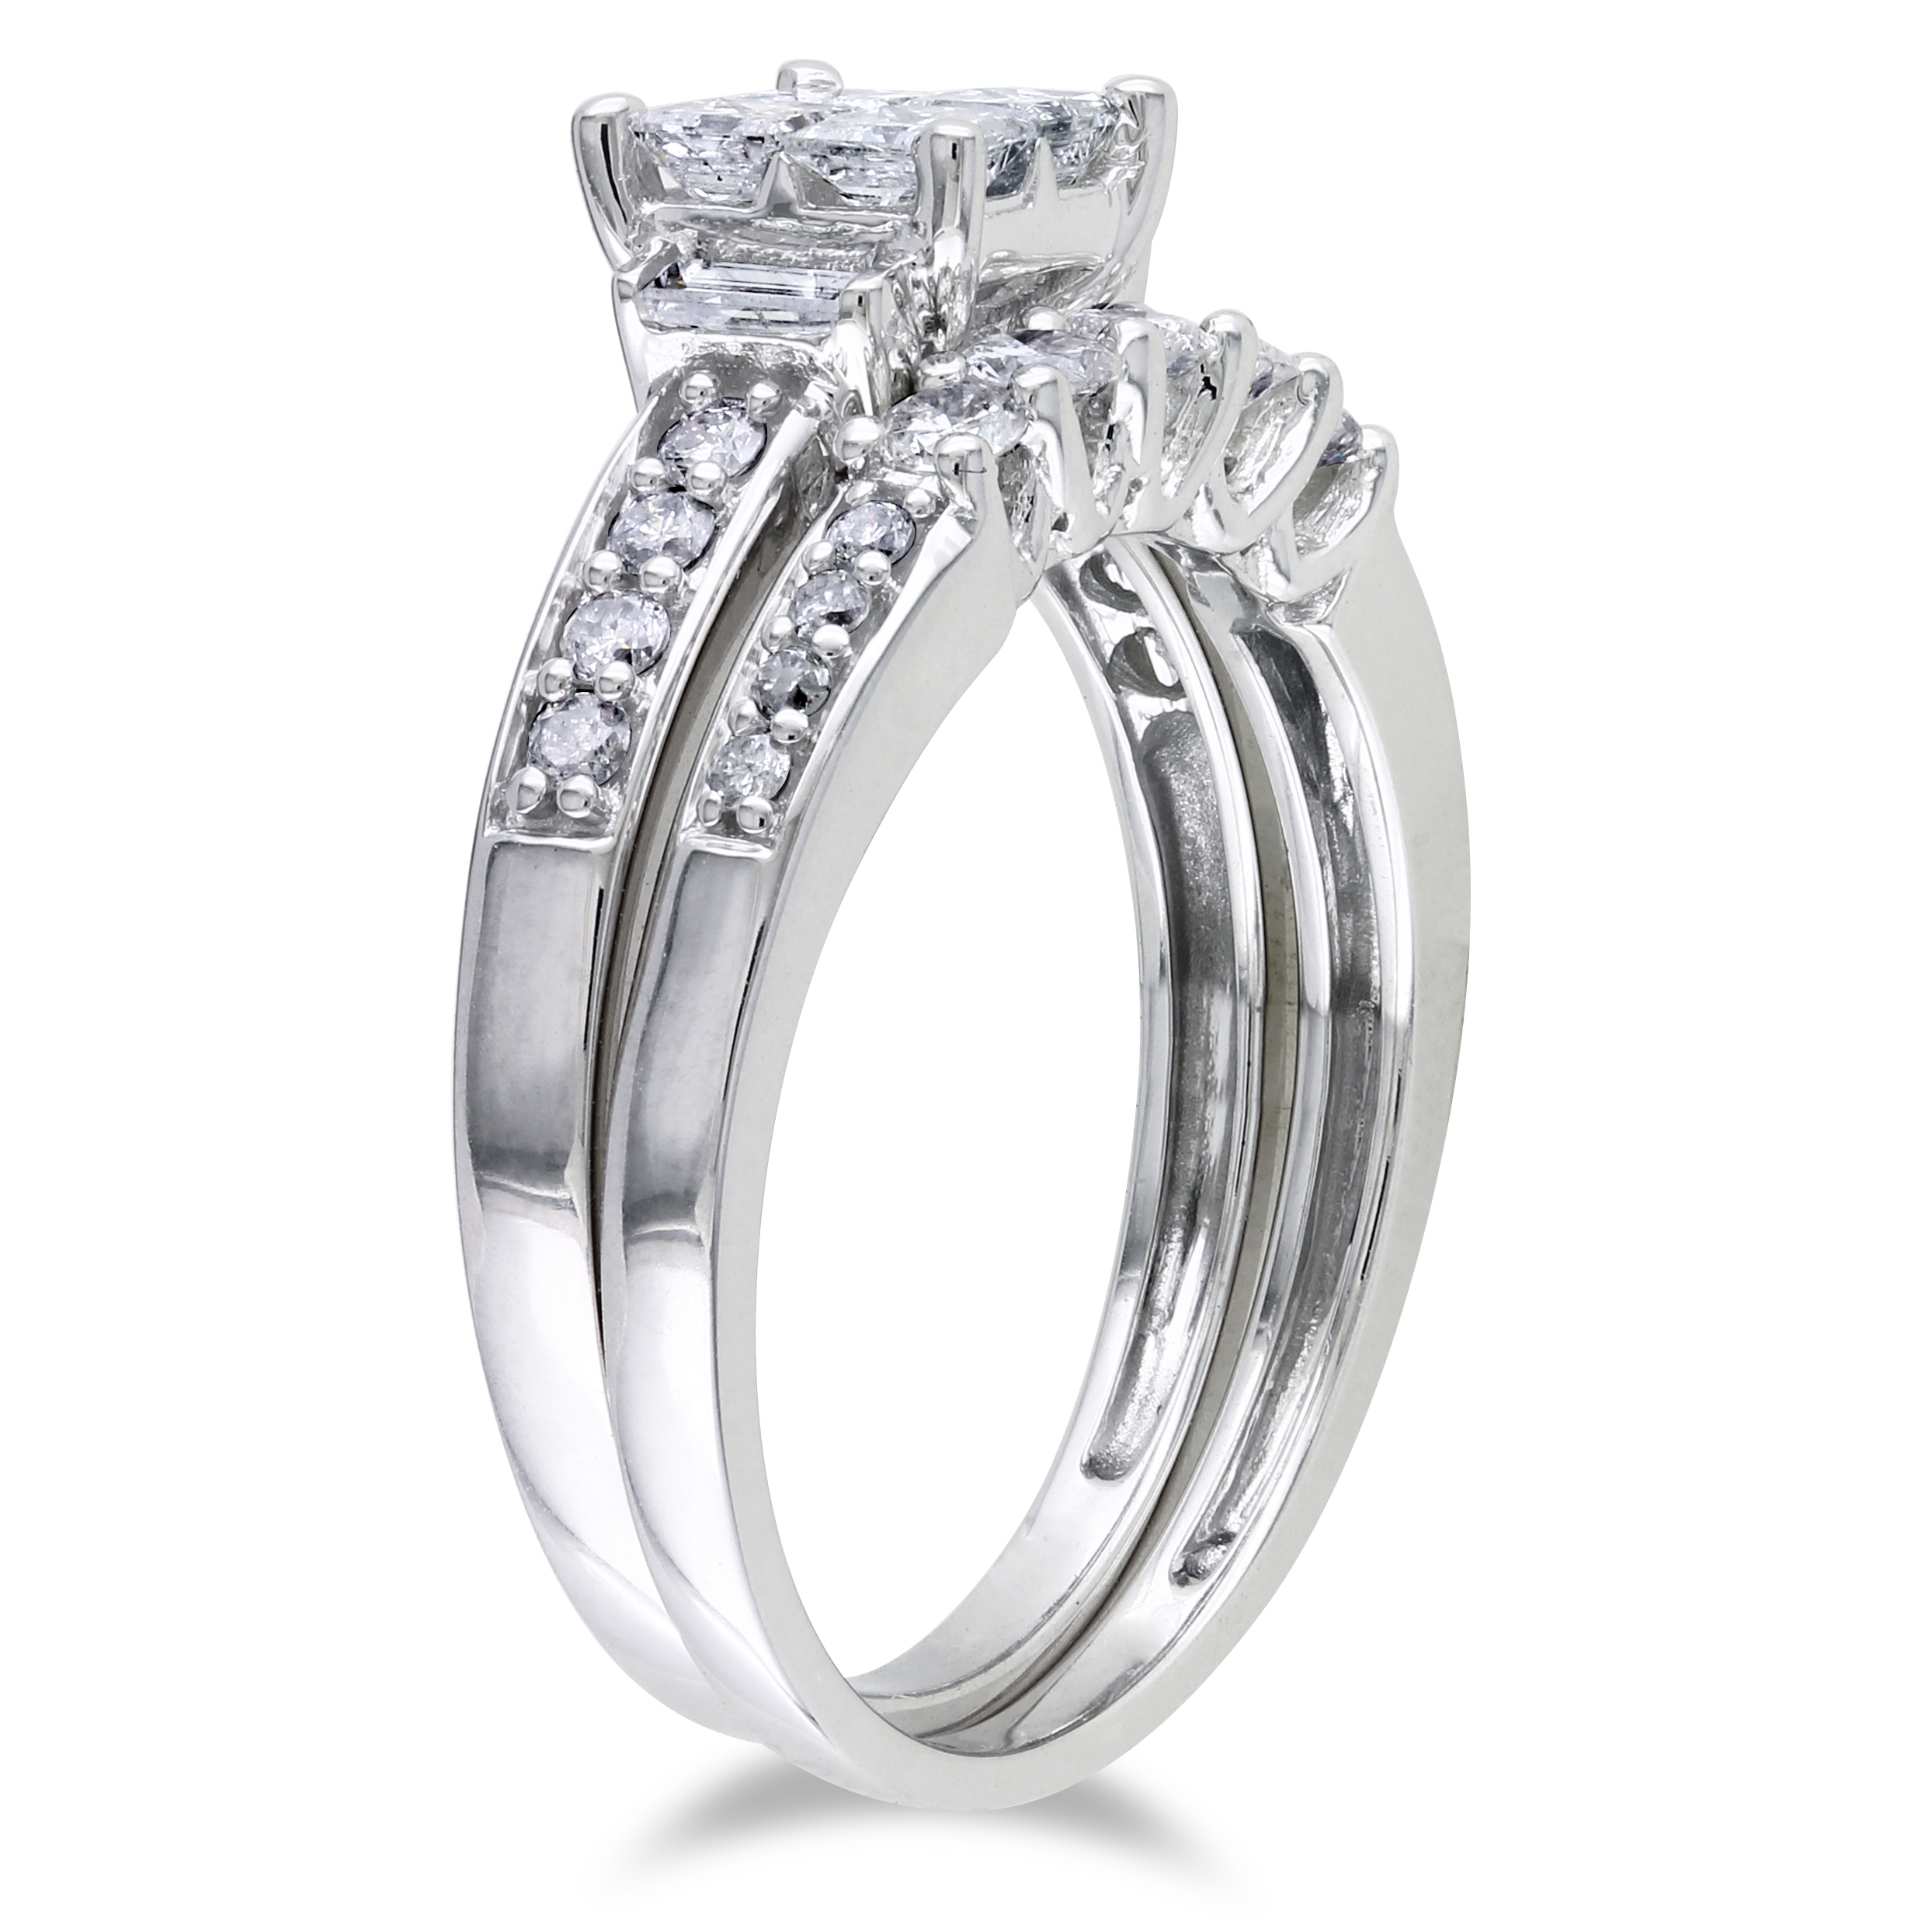 1 CT TW Princess Cut, Parallel Baguette and Round Diamond Bridal Set in 14k White Gold